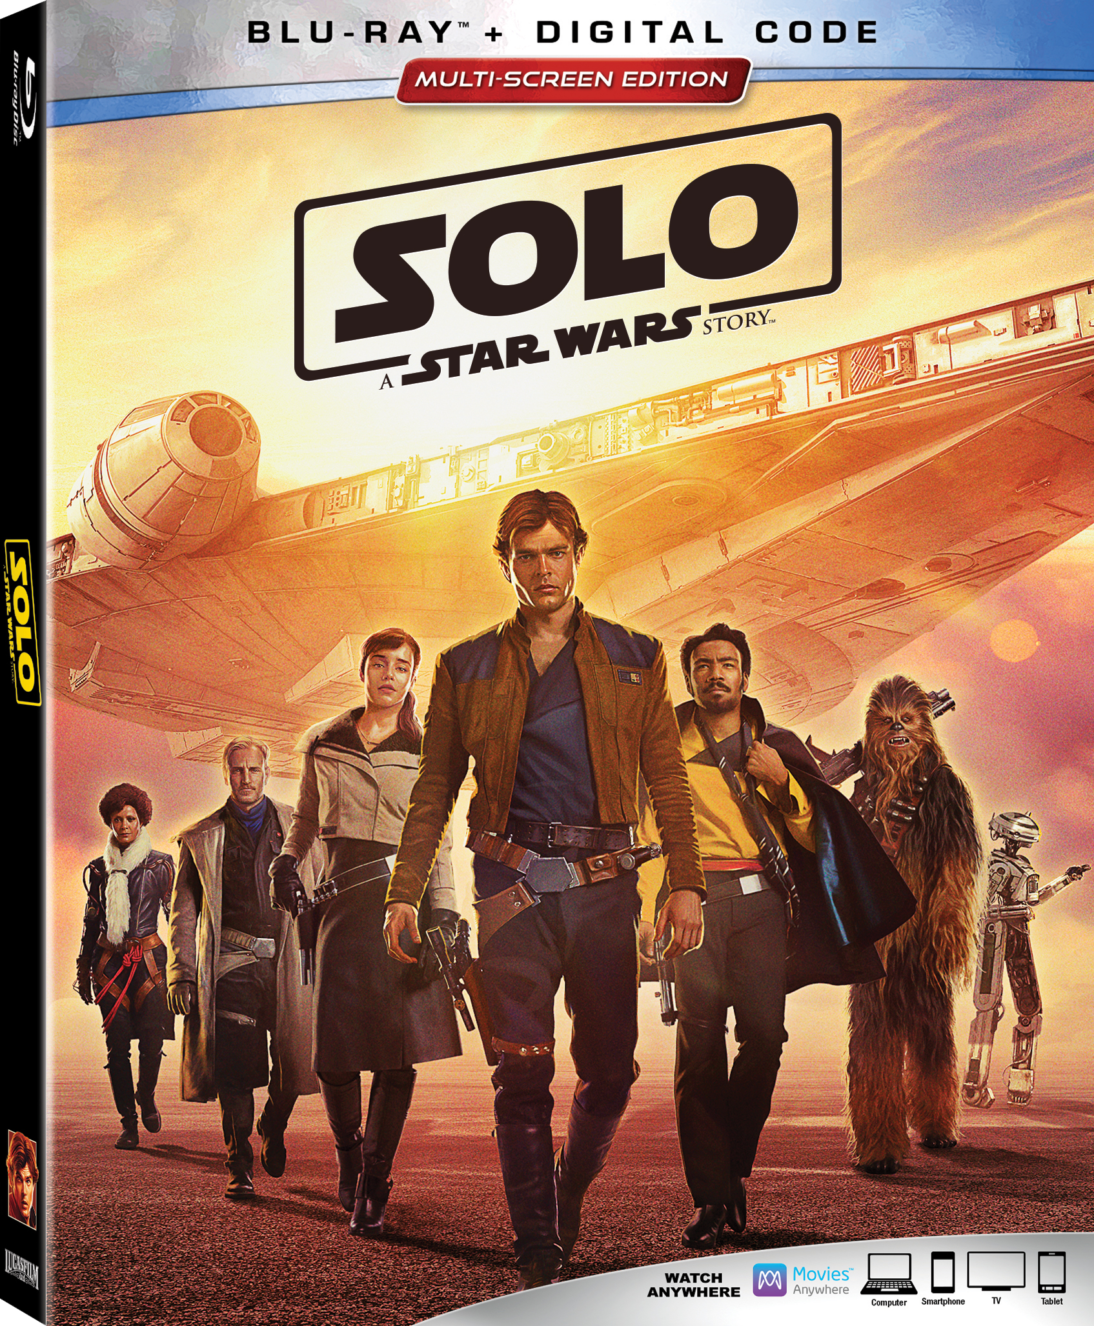 Lucasfilm’s Solo: A Star Wars Story